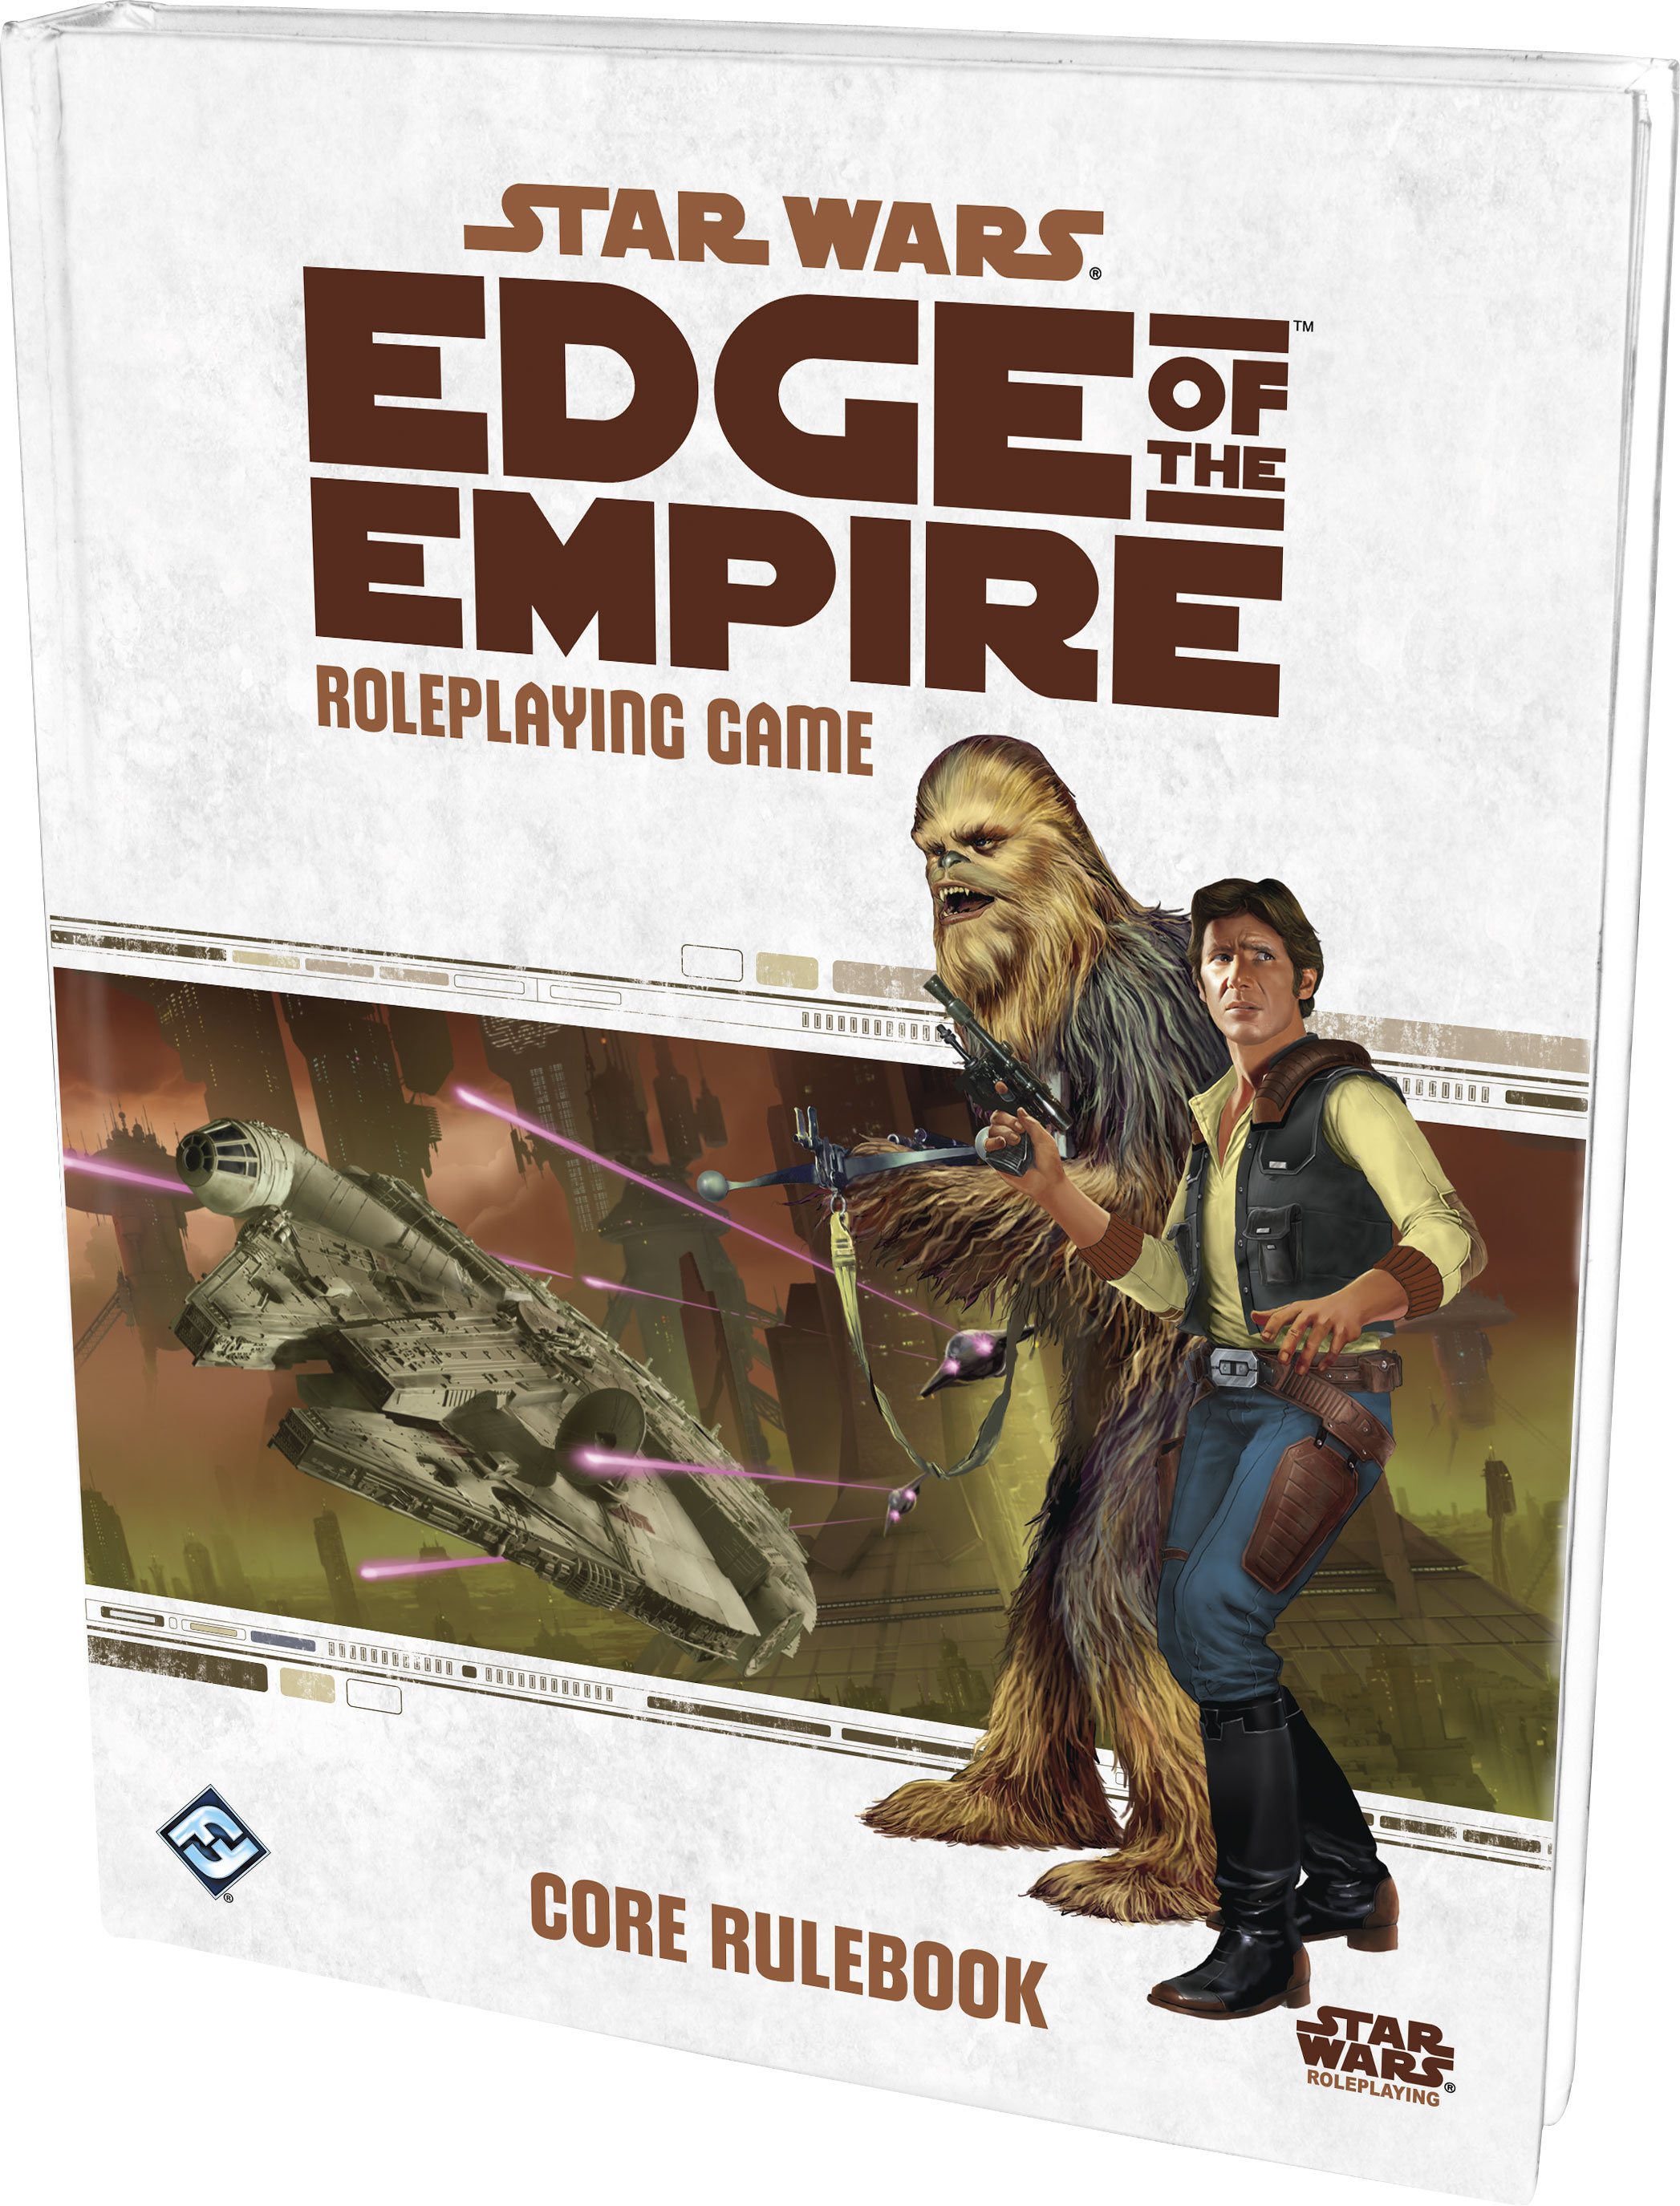 The Edge of the Empire Core Rulebook enables players to create complex characters and their own action-packed Star Wars adventure.